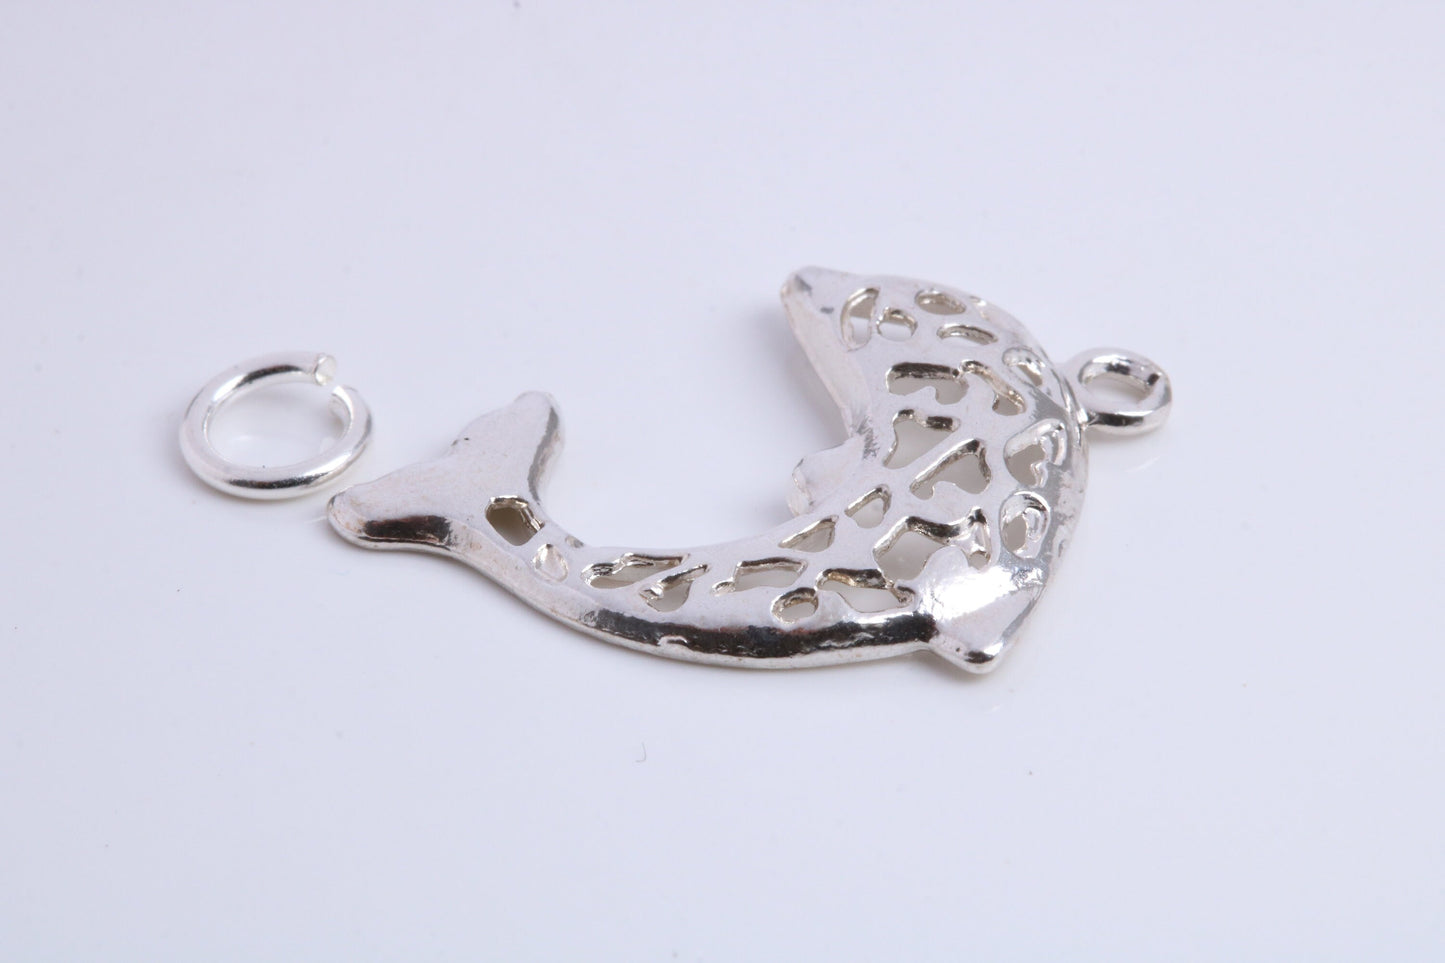 Fish Charm, Traditional Charm, Made from Solid 925 Grade Sterling Silver, Complete with Attachment Link